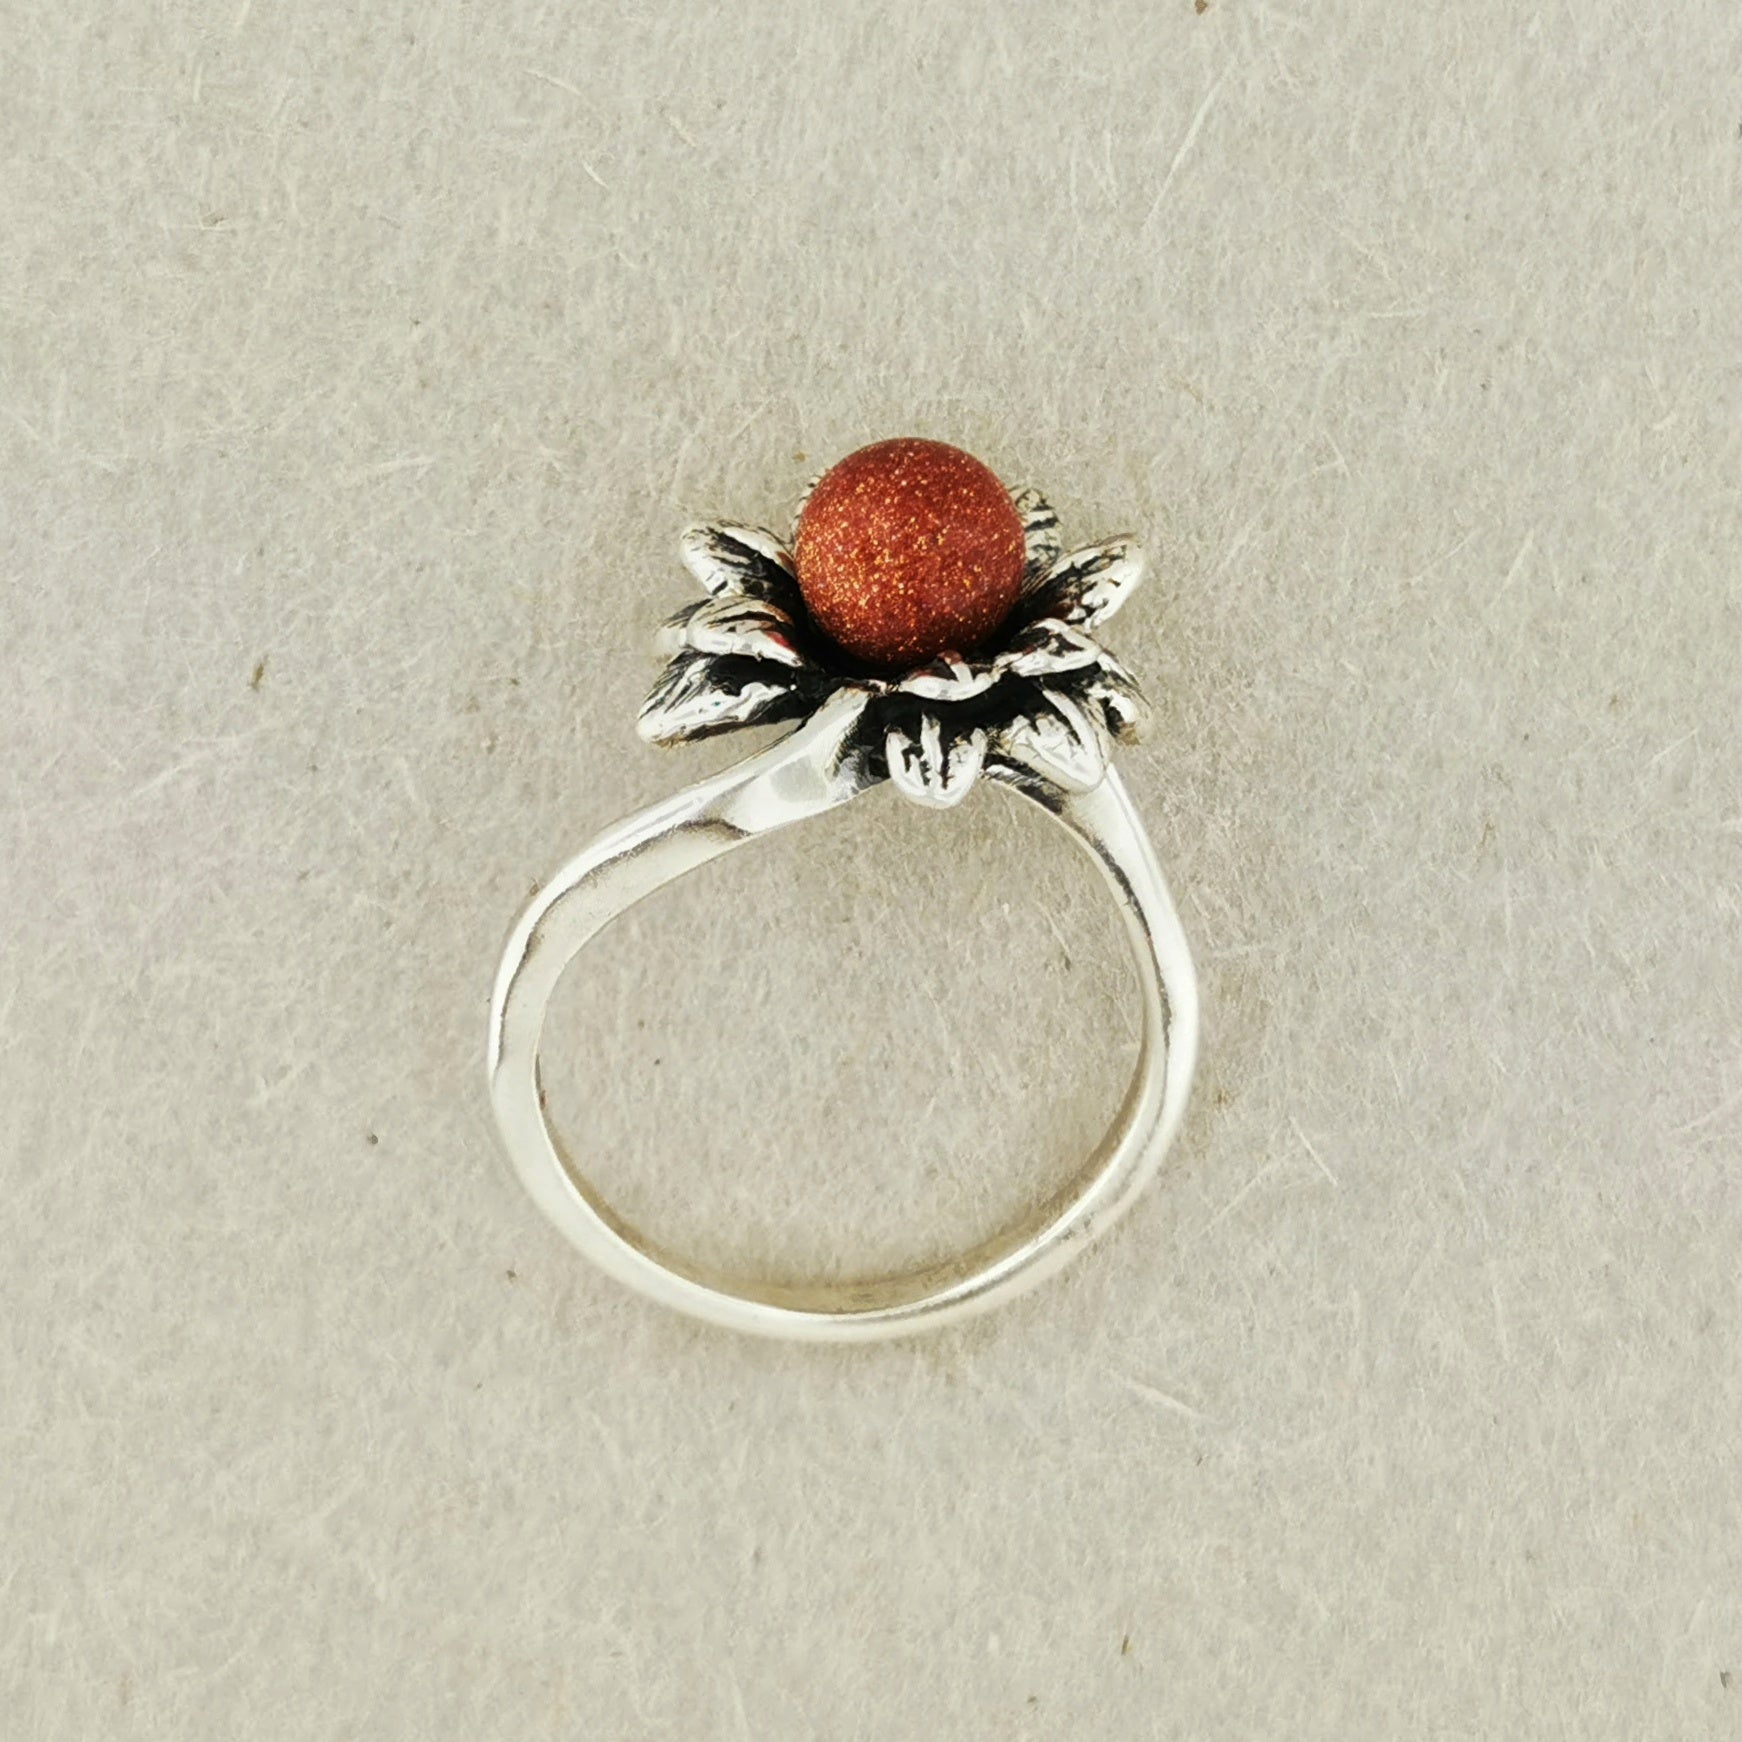 1950s Style Flower Ring with Gemstone Pearl in Sterling Silver or Antique Bronze, Silver Flower Ring, Flower Gemstone Ring, Silver Pearl Ring, Gemstone Pearl Ring, Flower Pearl Ring, Wood Style Ring, Vintage Gemstone Ring, Vintage Style Ring, Retro Silver Ring, Retro Gemstone Ring, Retro Silver Gemstone Ring, Retro Silver Jewelry, Retro Silver Jewellery